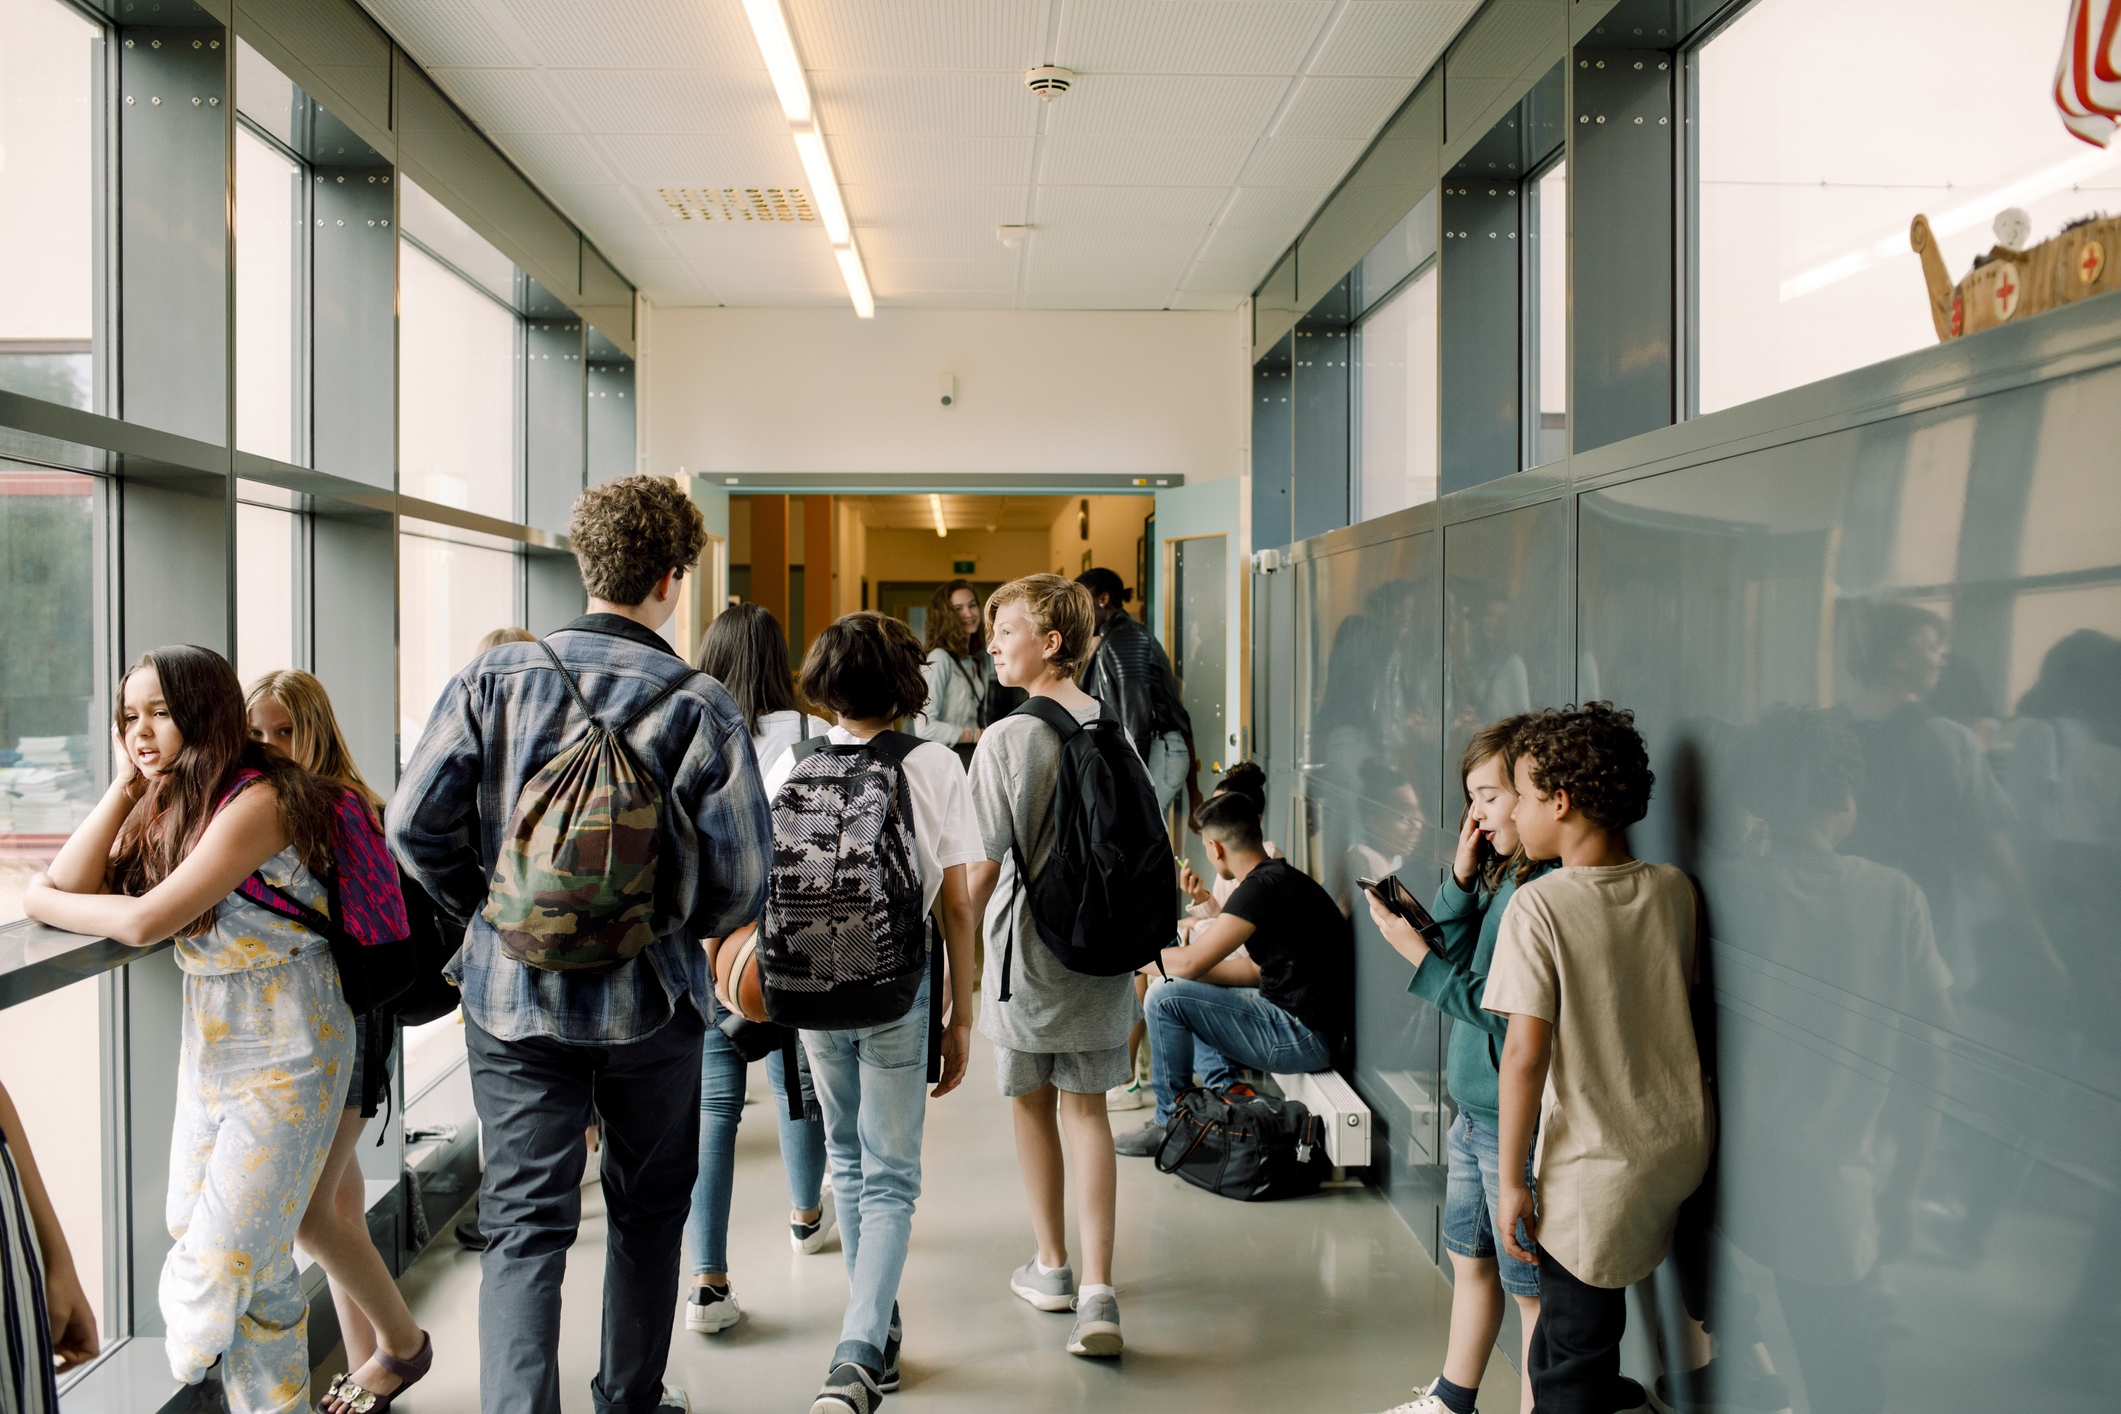 Group of students with backpacks in a school hallway, interacting by lockers